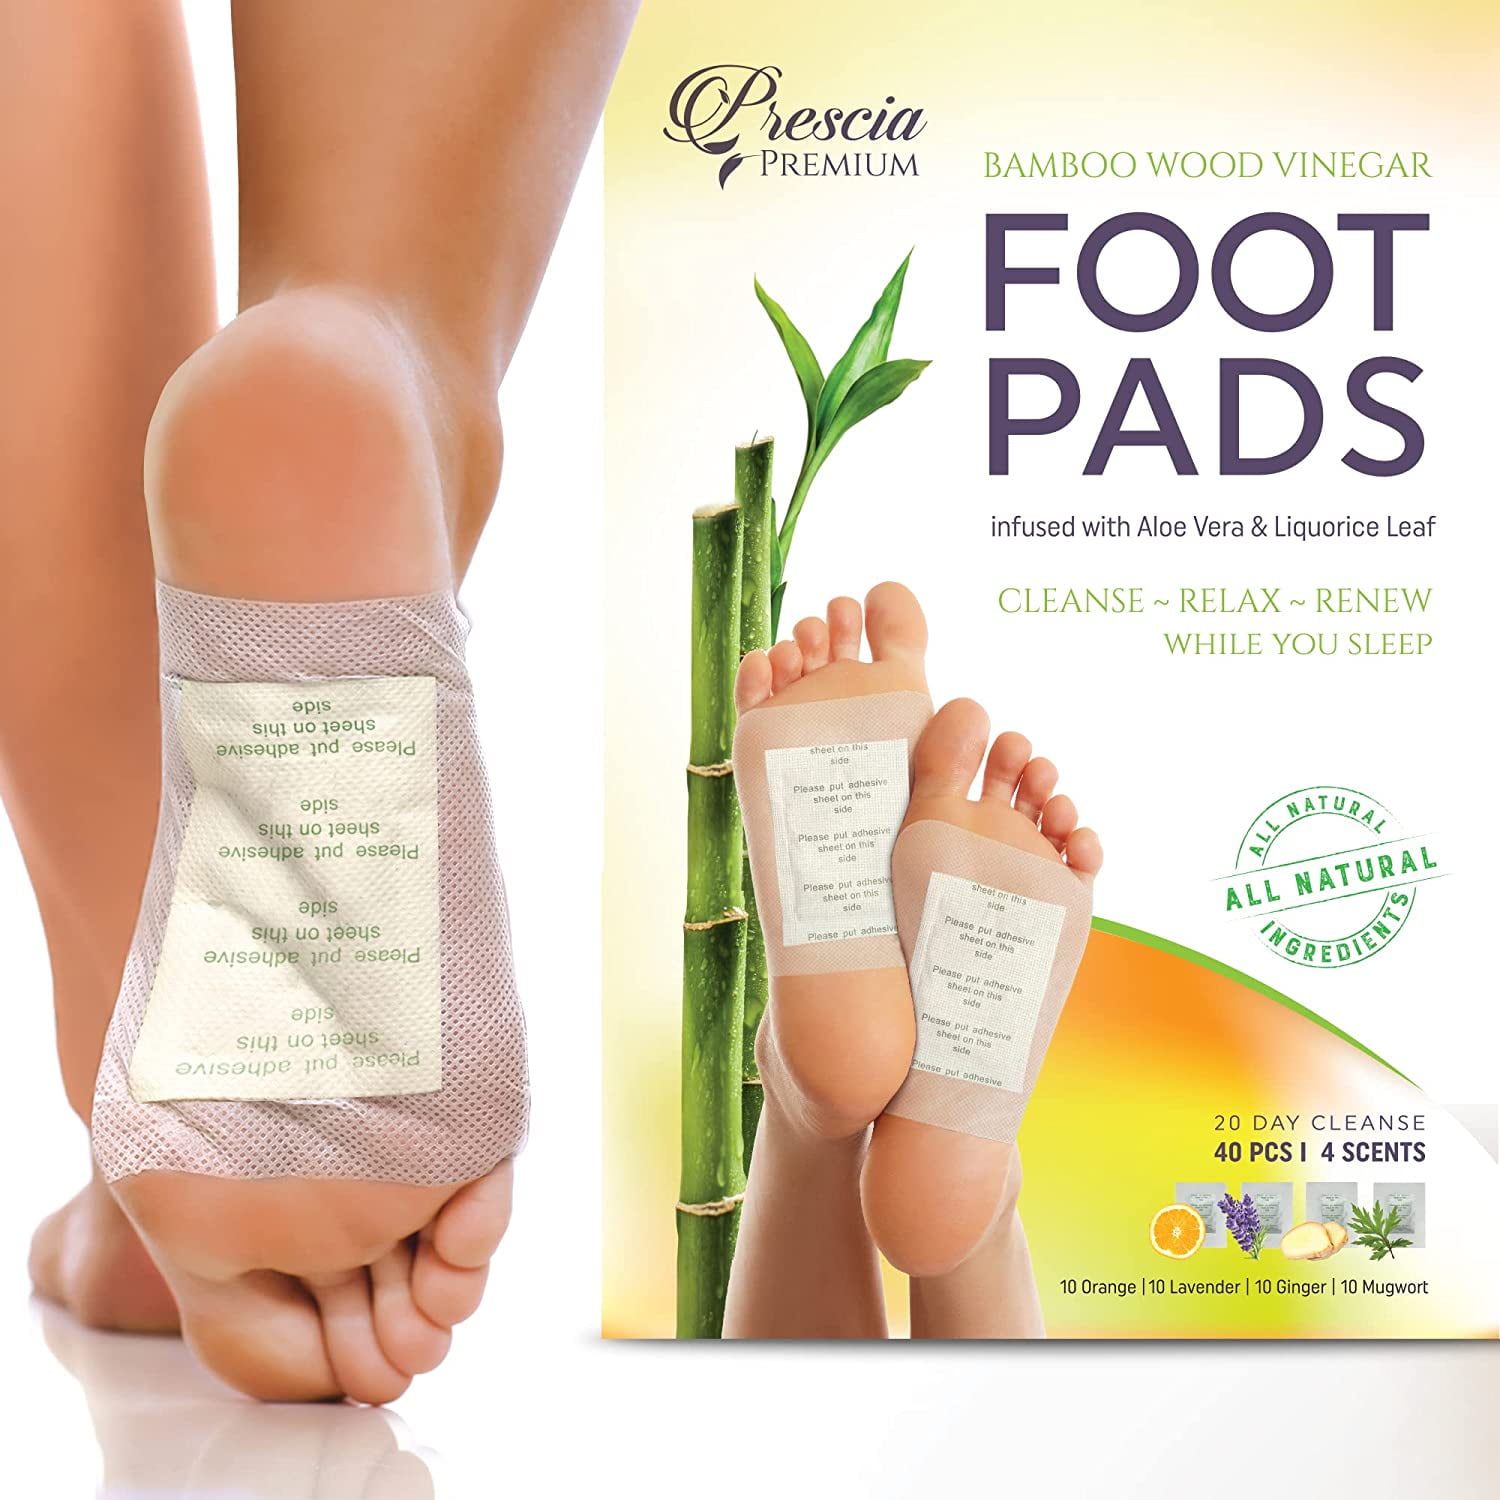 Cleansing30 Piece PatchAids in Rel Prescia Foot PadsRemove Impurities 